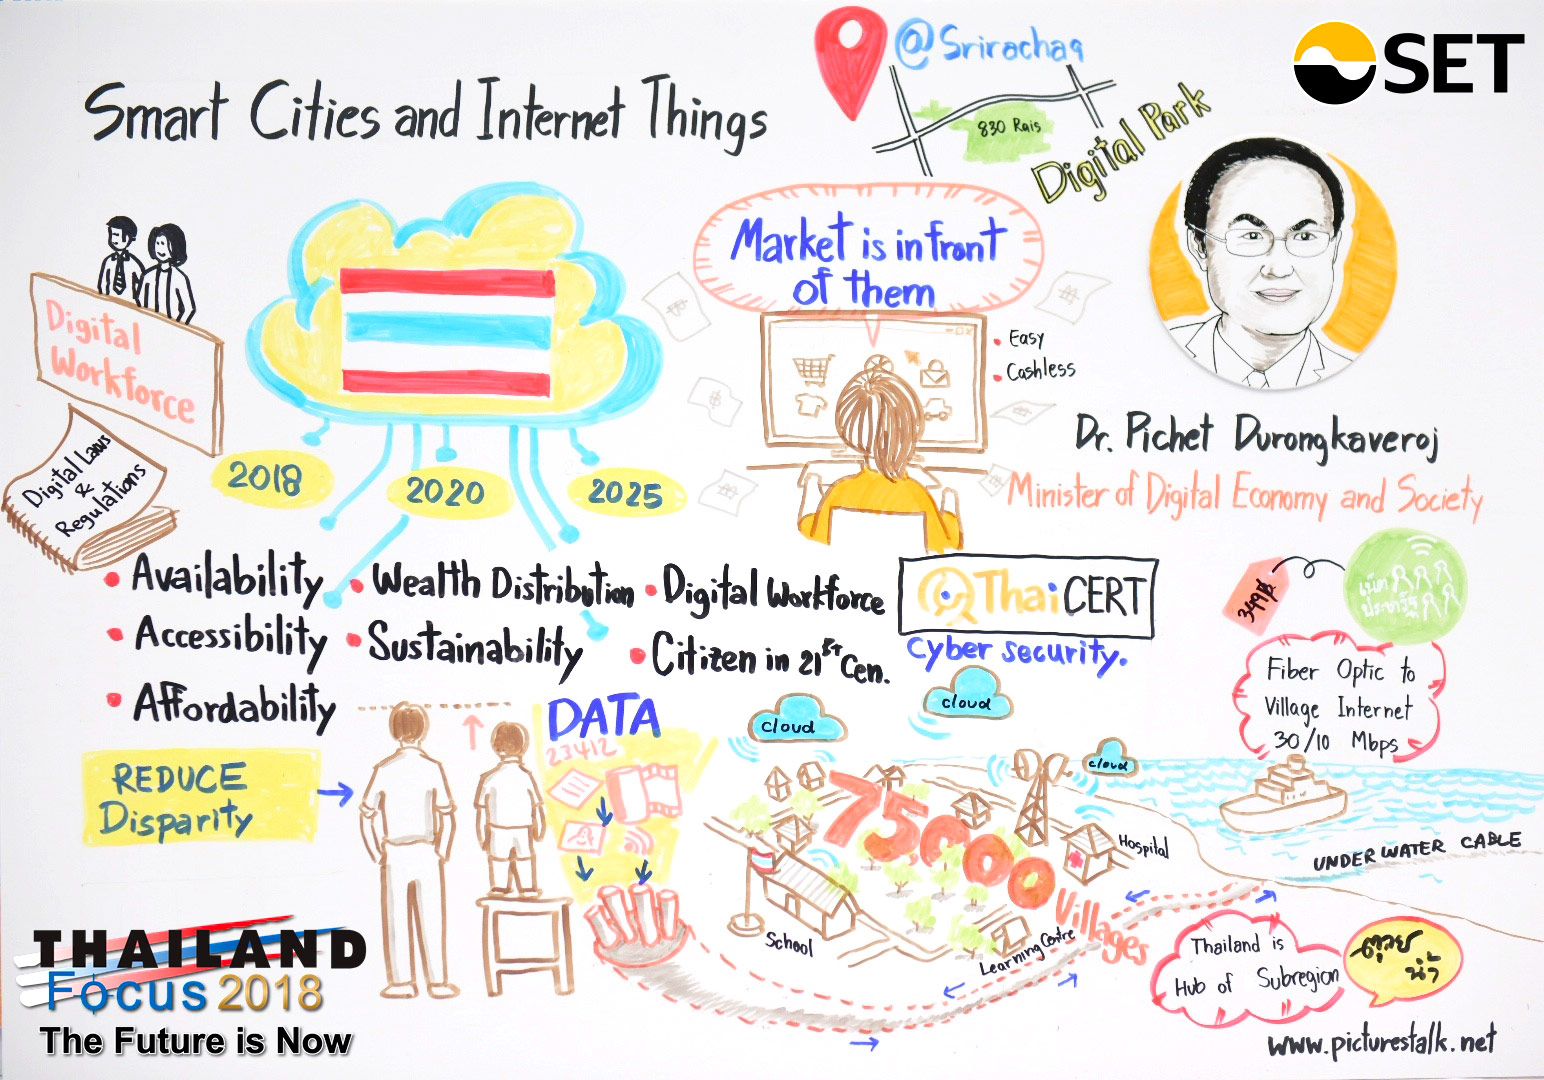 Thailand Focus 2018 - Smart Cities and Internet of Things - Dr.Pichet Durongkaveroj